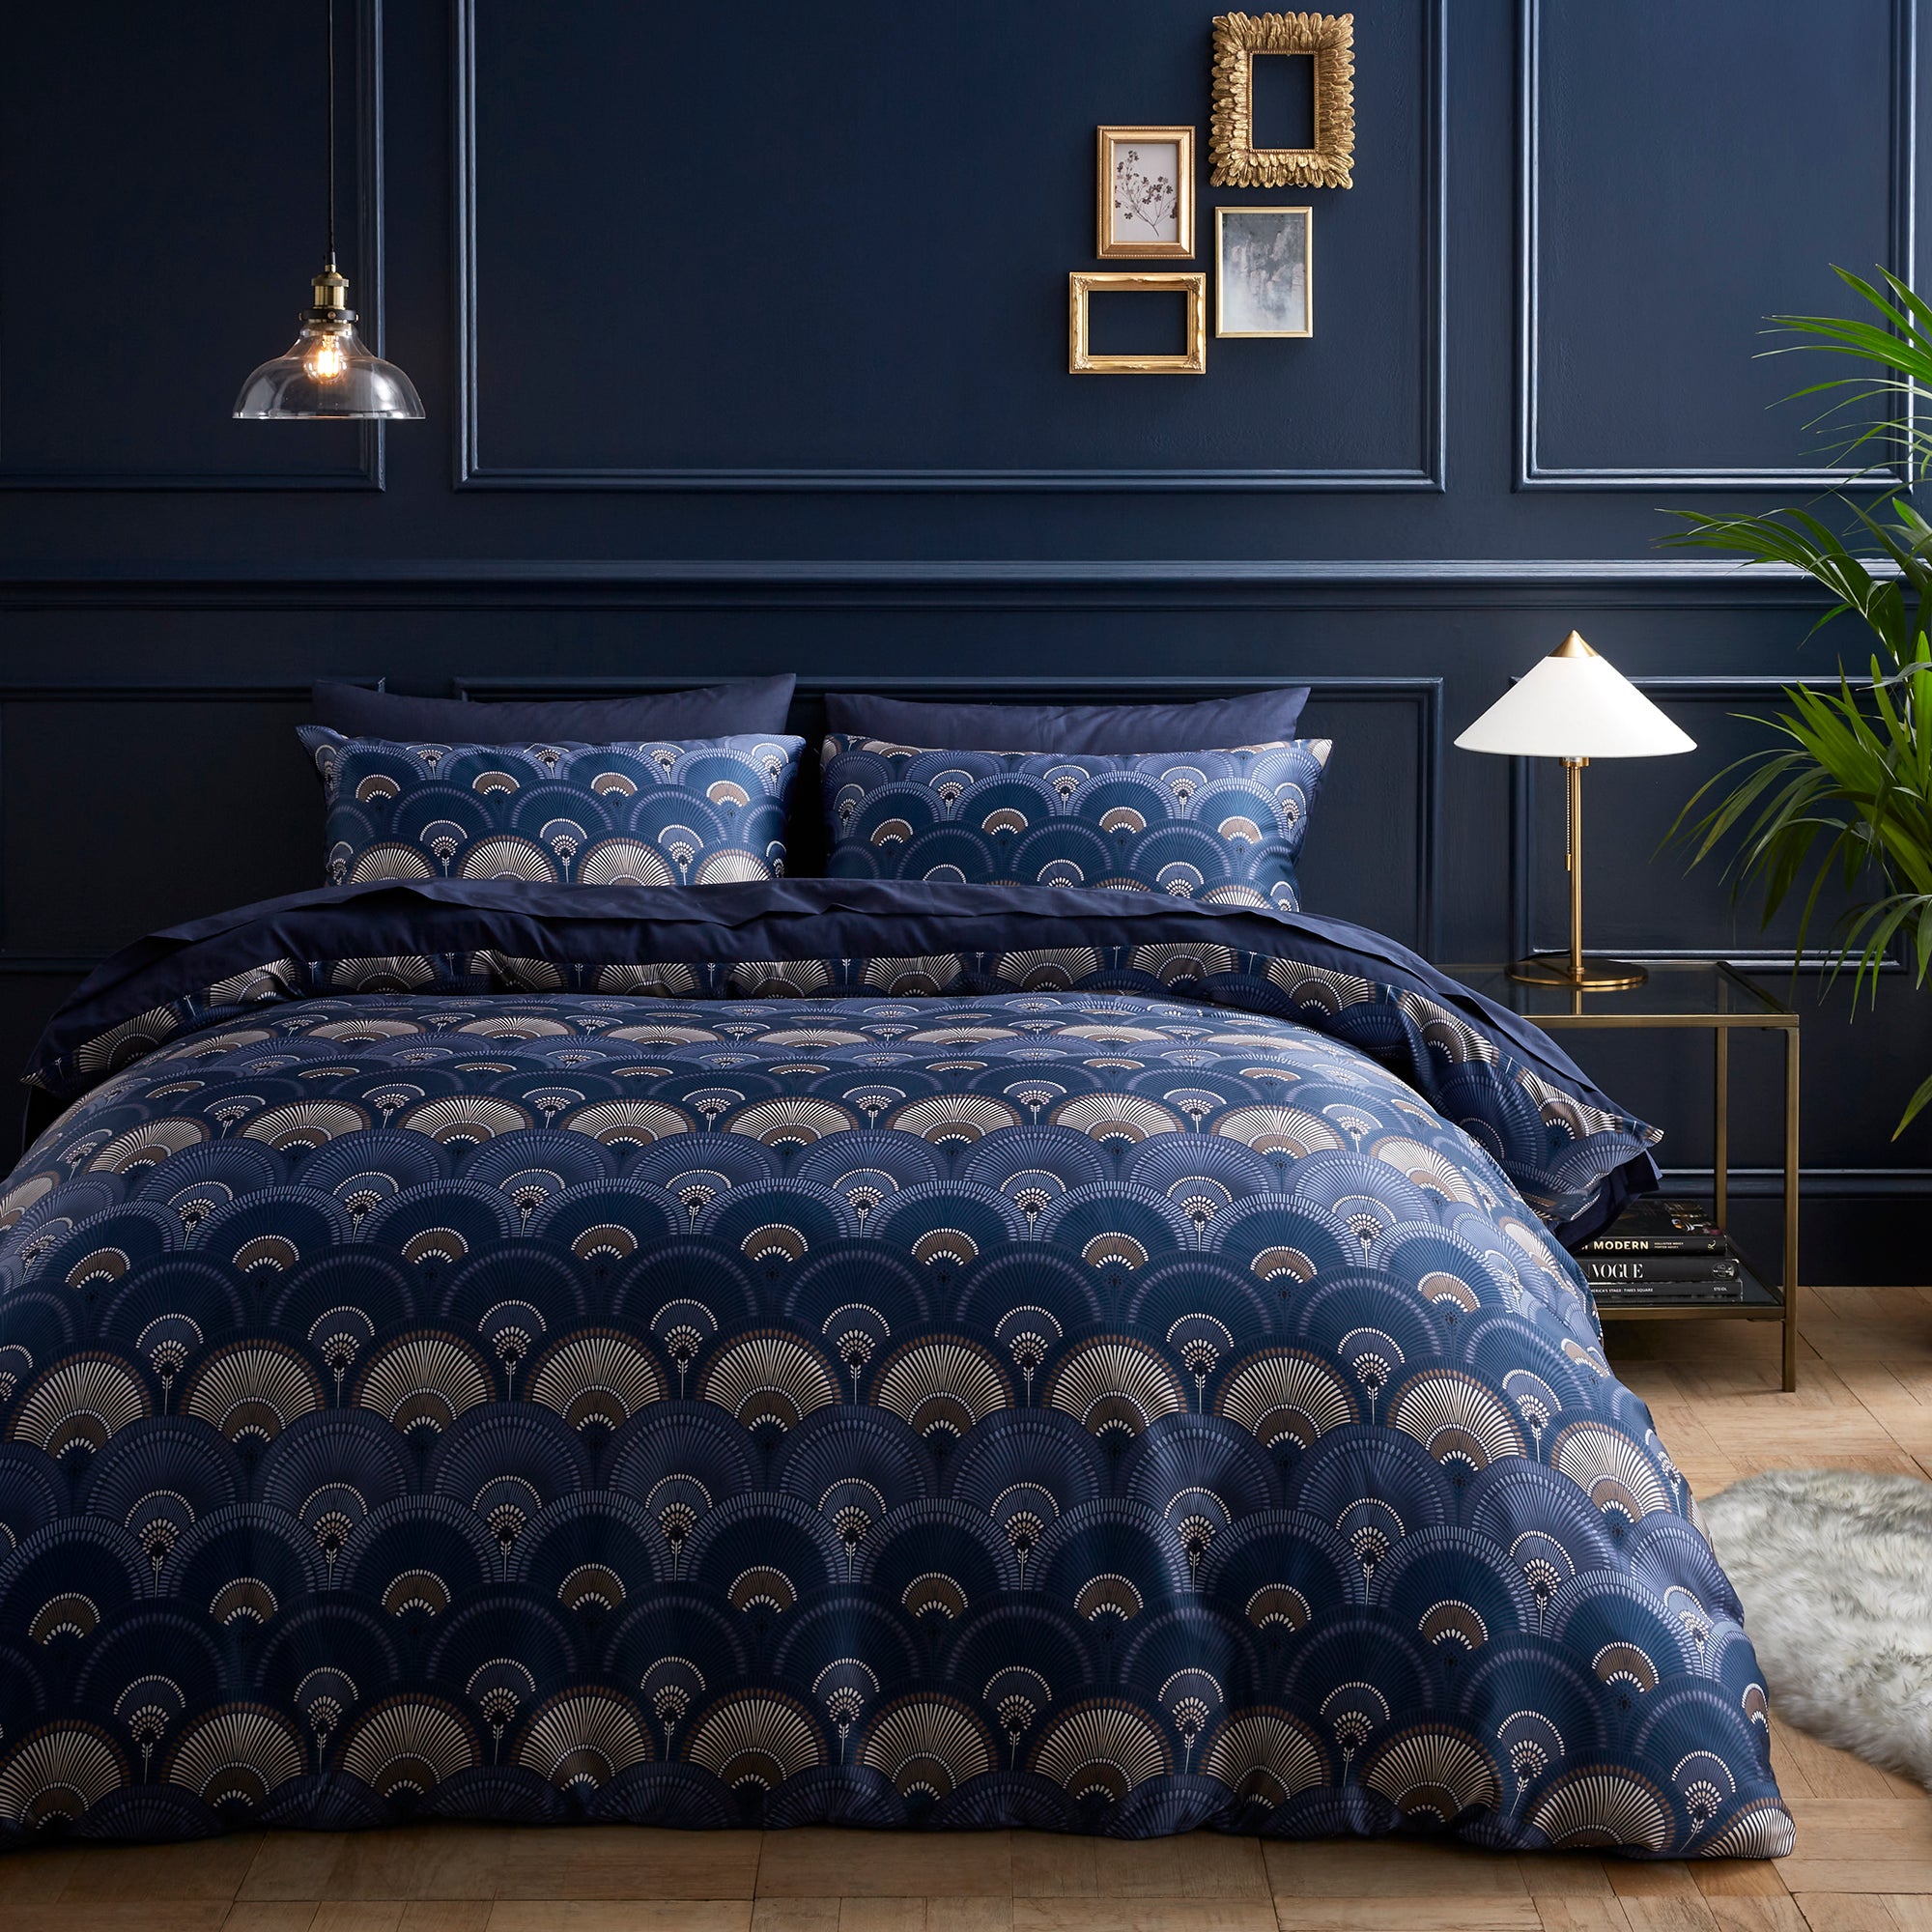 Pierre Fan Navy And Gold Duvet Cover And Pillowcase Set Navy Blue